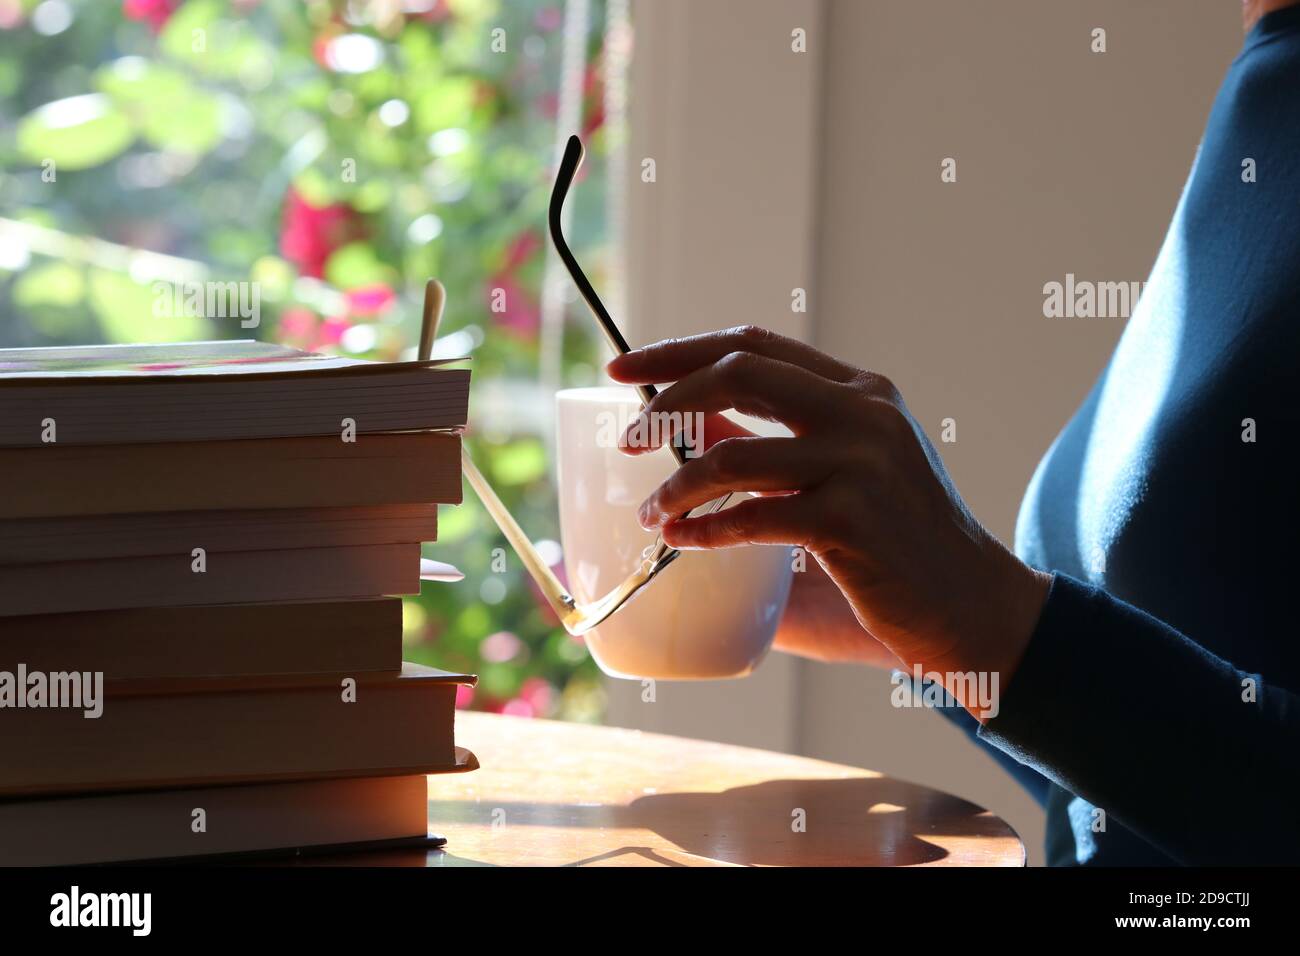 Woman with eye glasses sitting at table with a pile of books Stock Photo